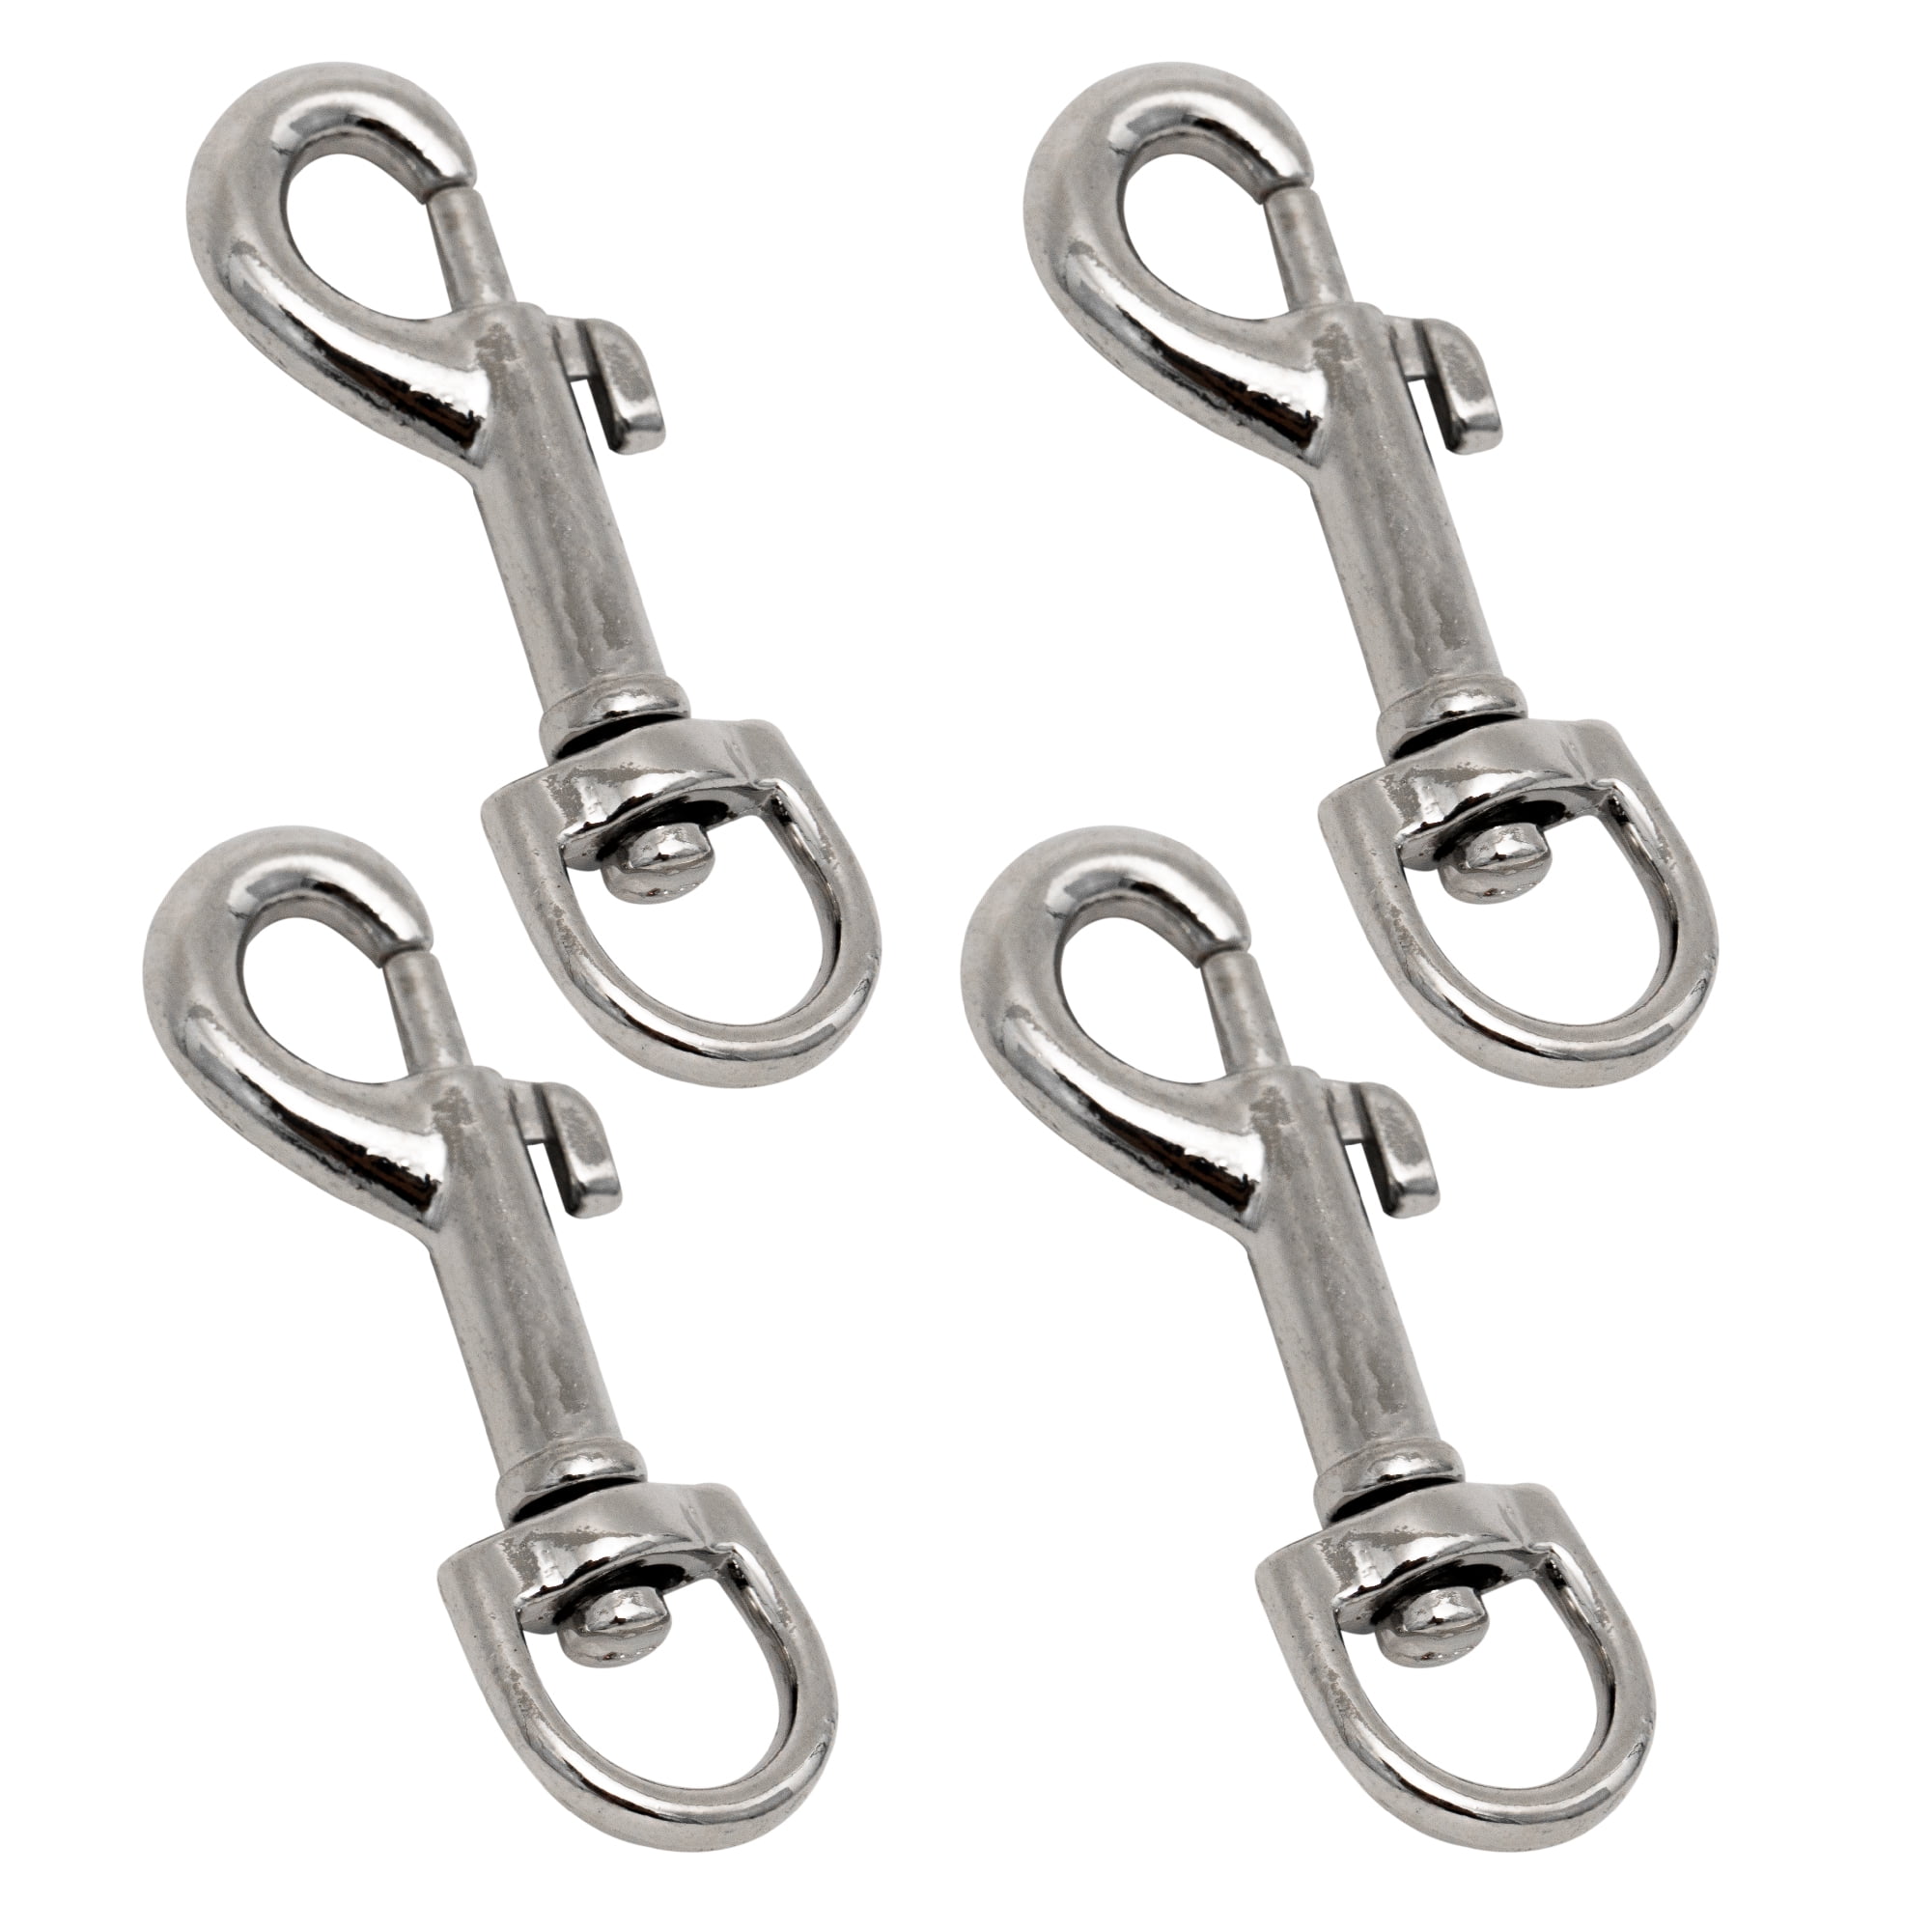 Everbilt 3/4 in. x 3-1/8 in. Nickel-Plated Swivel Quick Snap 44364